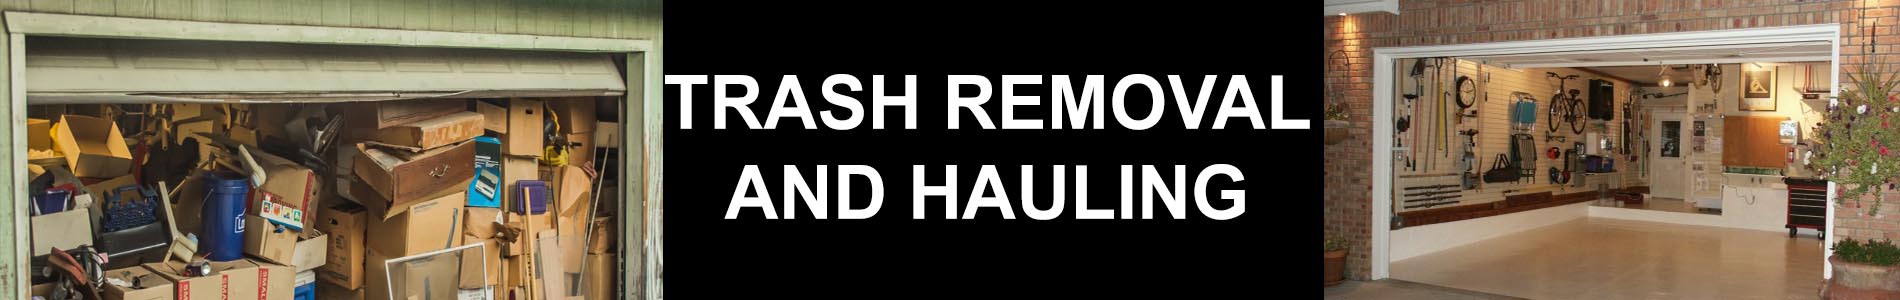 trash-removal-and-hauling